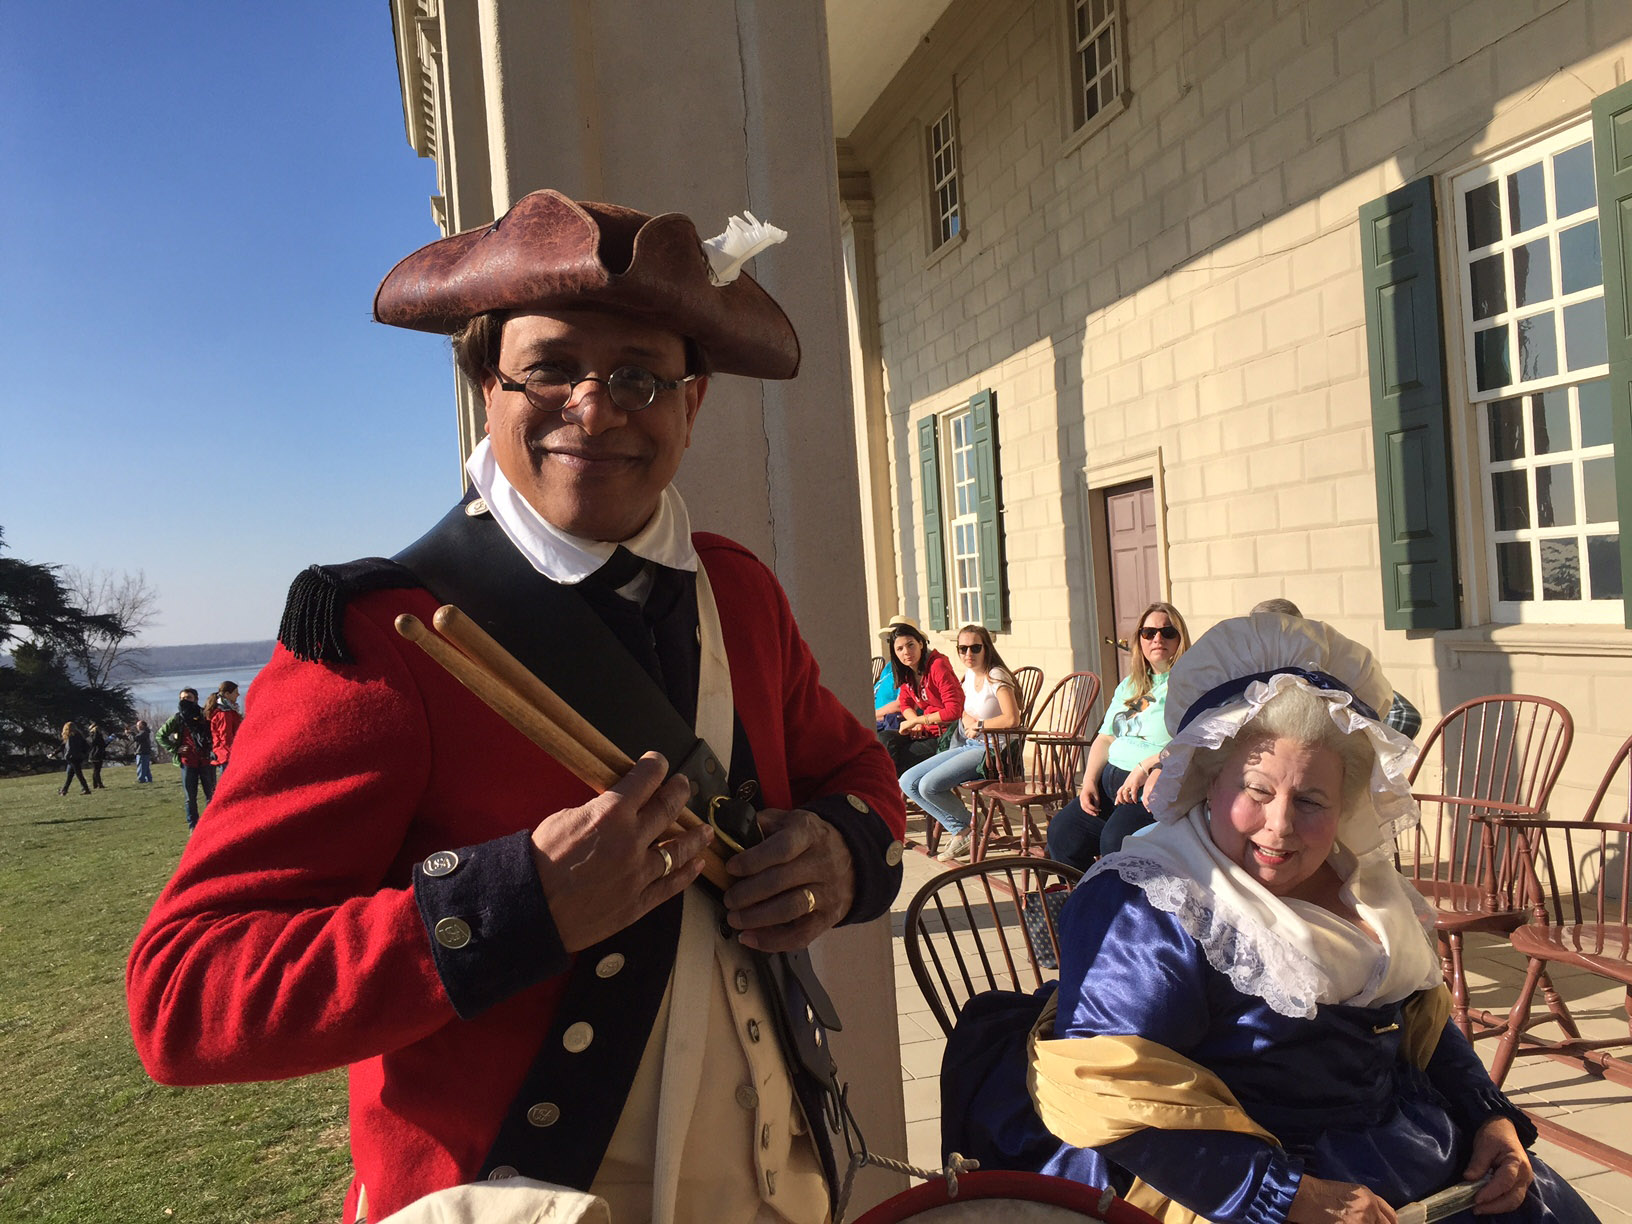 Re-enactors greet visitors to Mount Vernon, which threw open its doors to the public on Monday, Feb. 20, 2017 to celebrate George Washington's Birthday (WTOP/Rich Johnson)